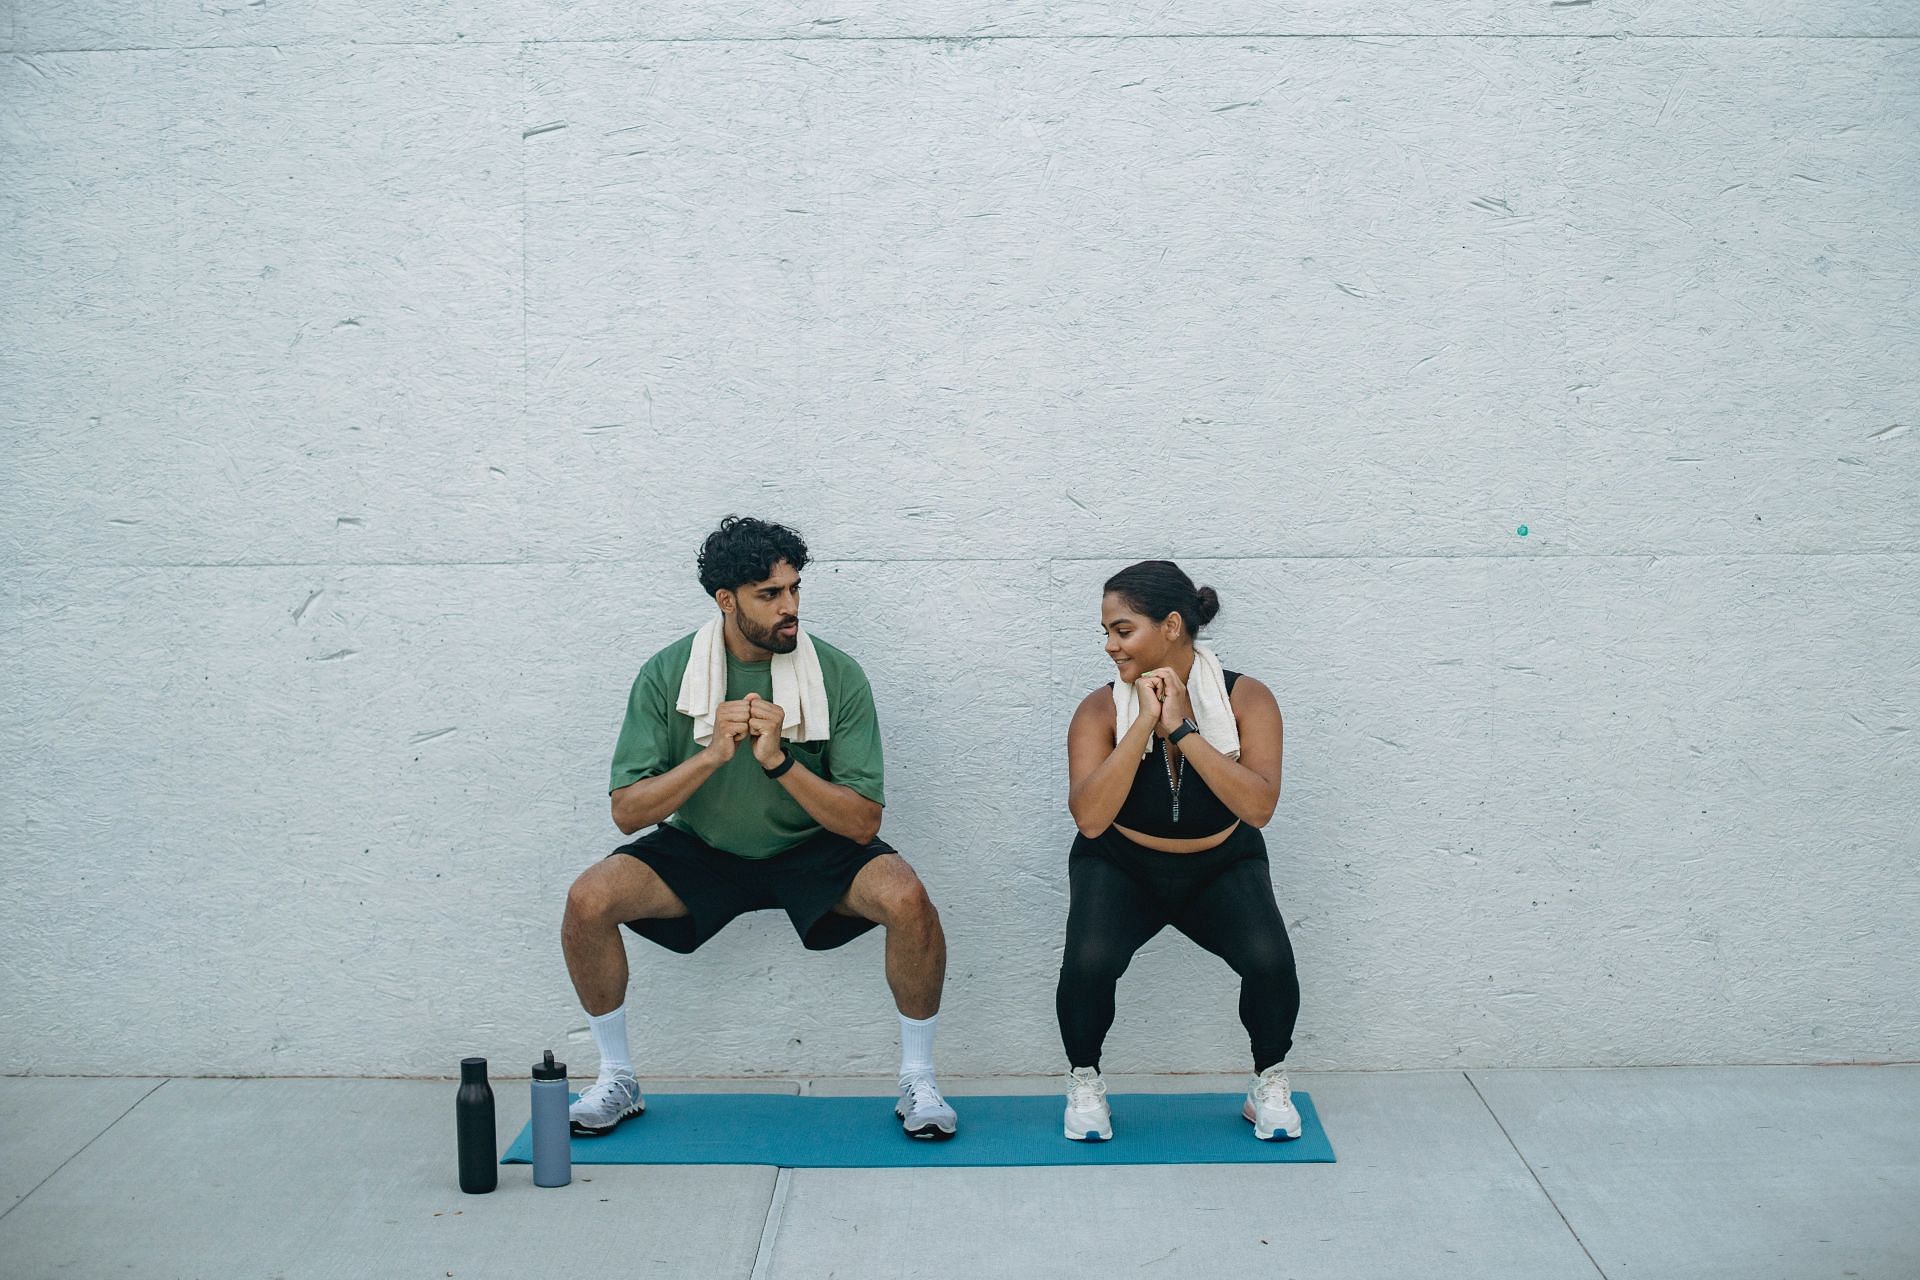 Jump squats can stop certain muscular groups from deteriorating naturally. (Image via Pexels/ Ketut Subiyanto)